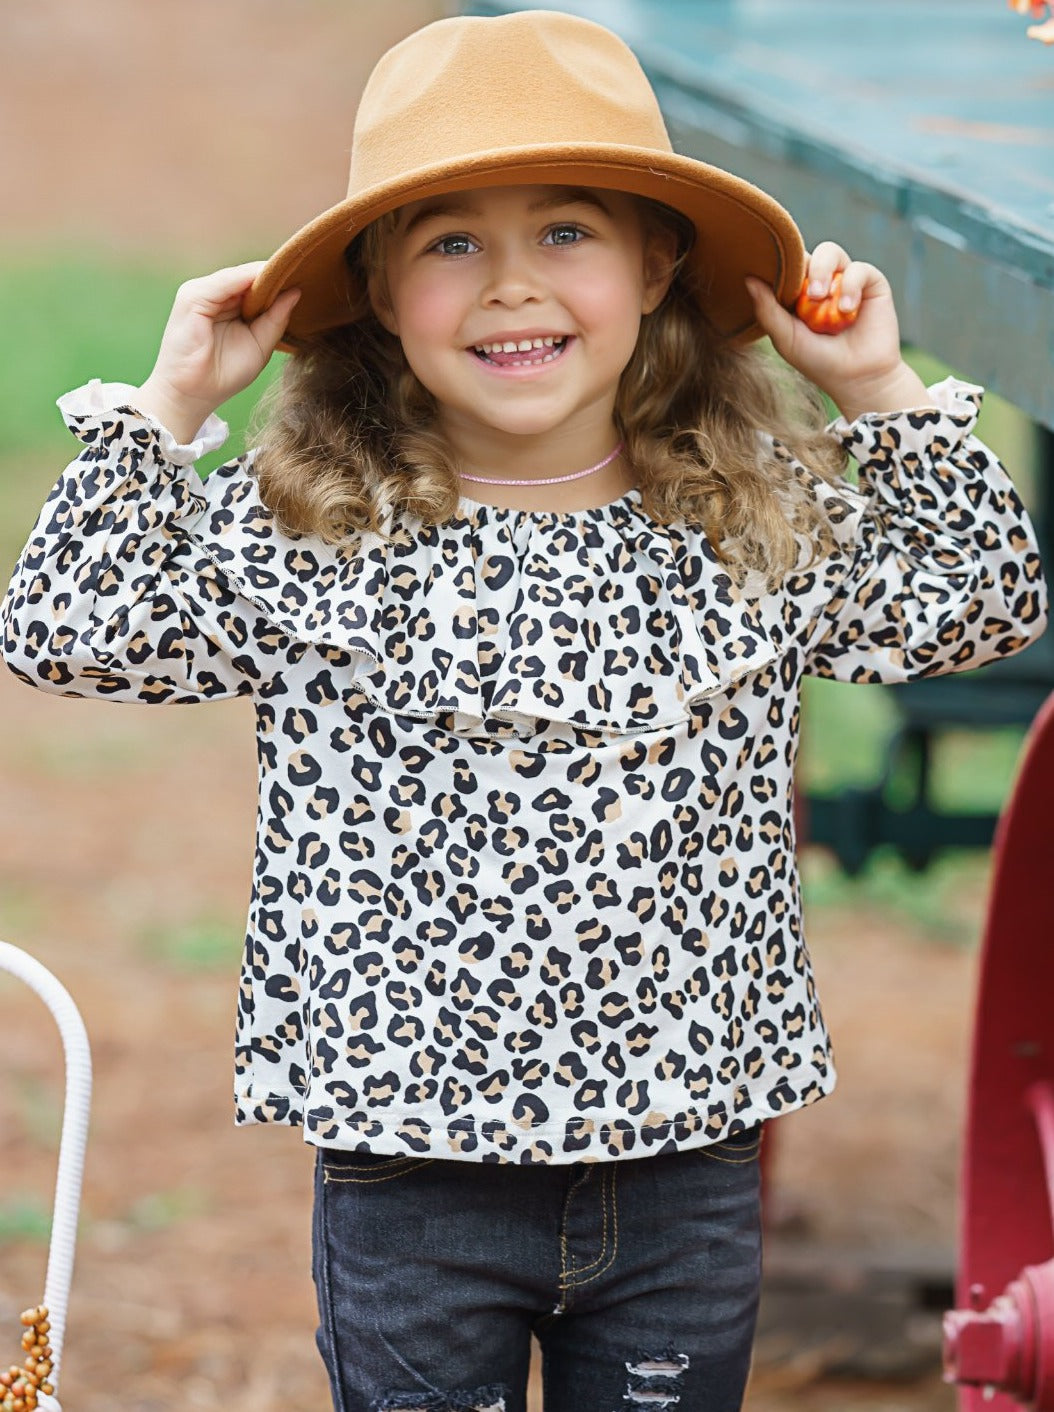 Girls set features a double ruffle neckline bib, animal printed top and patched jeans